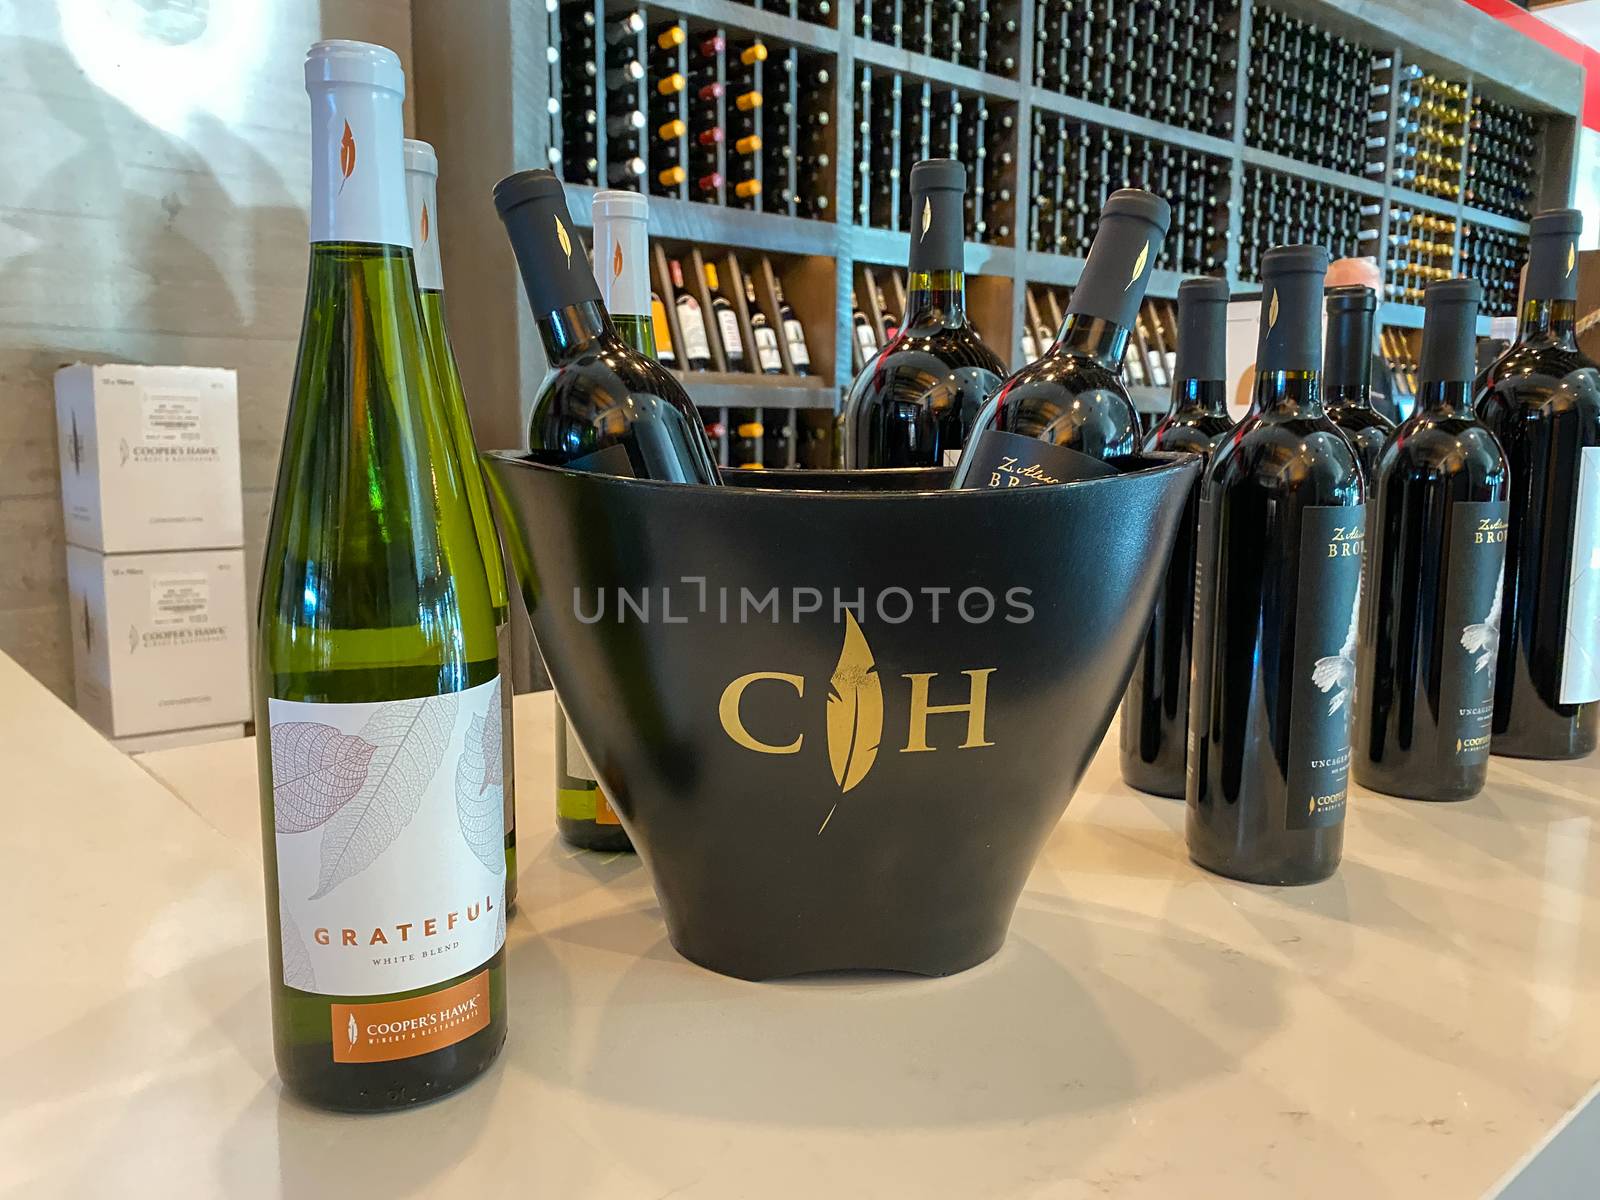 Naples, FL/USA - 10/30/20: Bottles of wine at a Coopers Hawk Wine bar and restaurant in Naples, Florida.